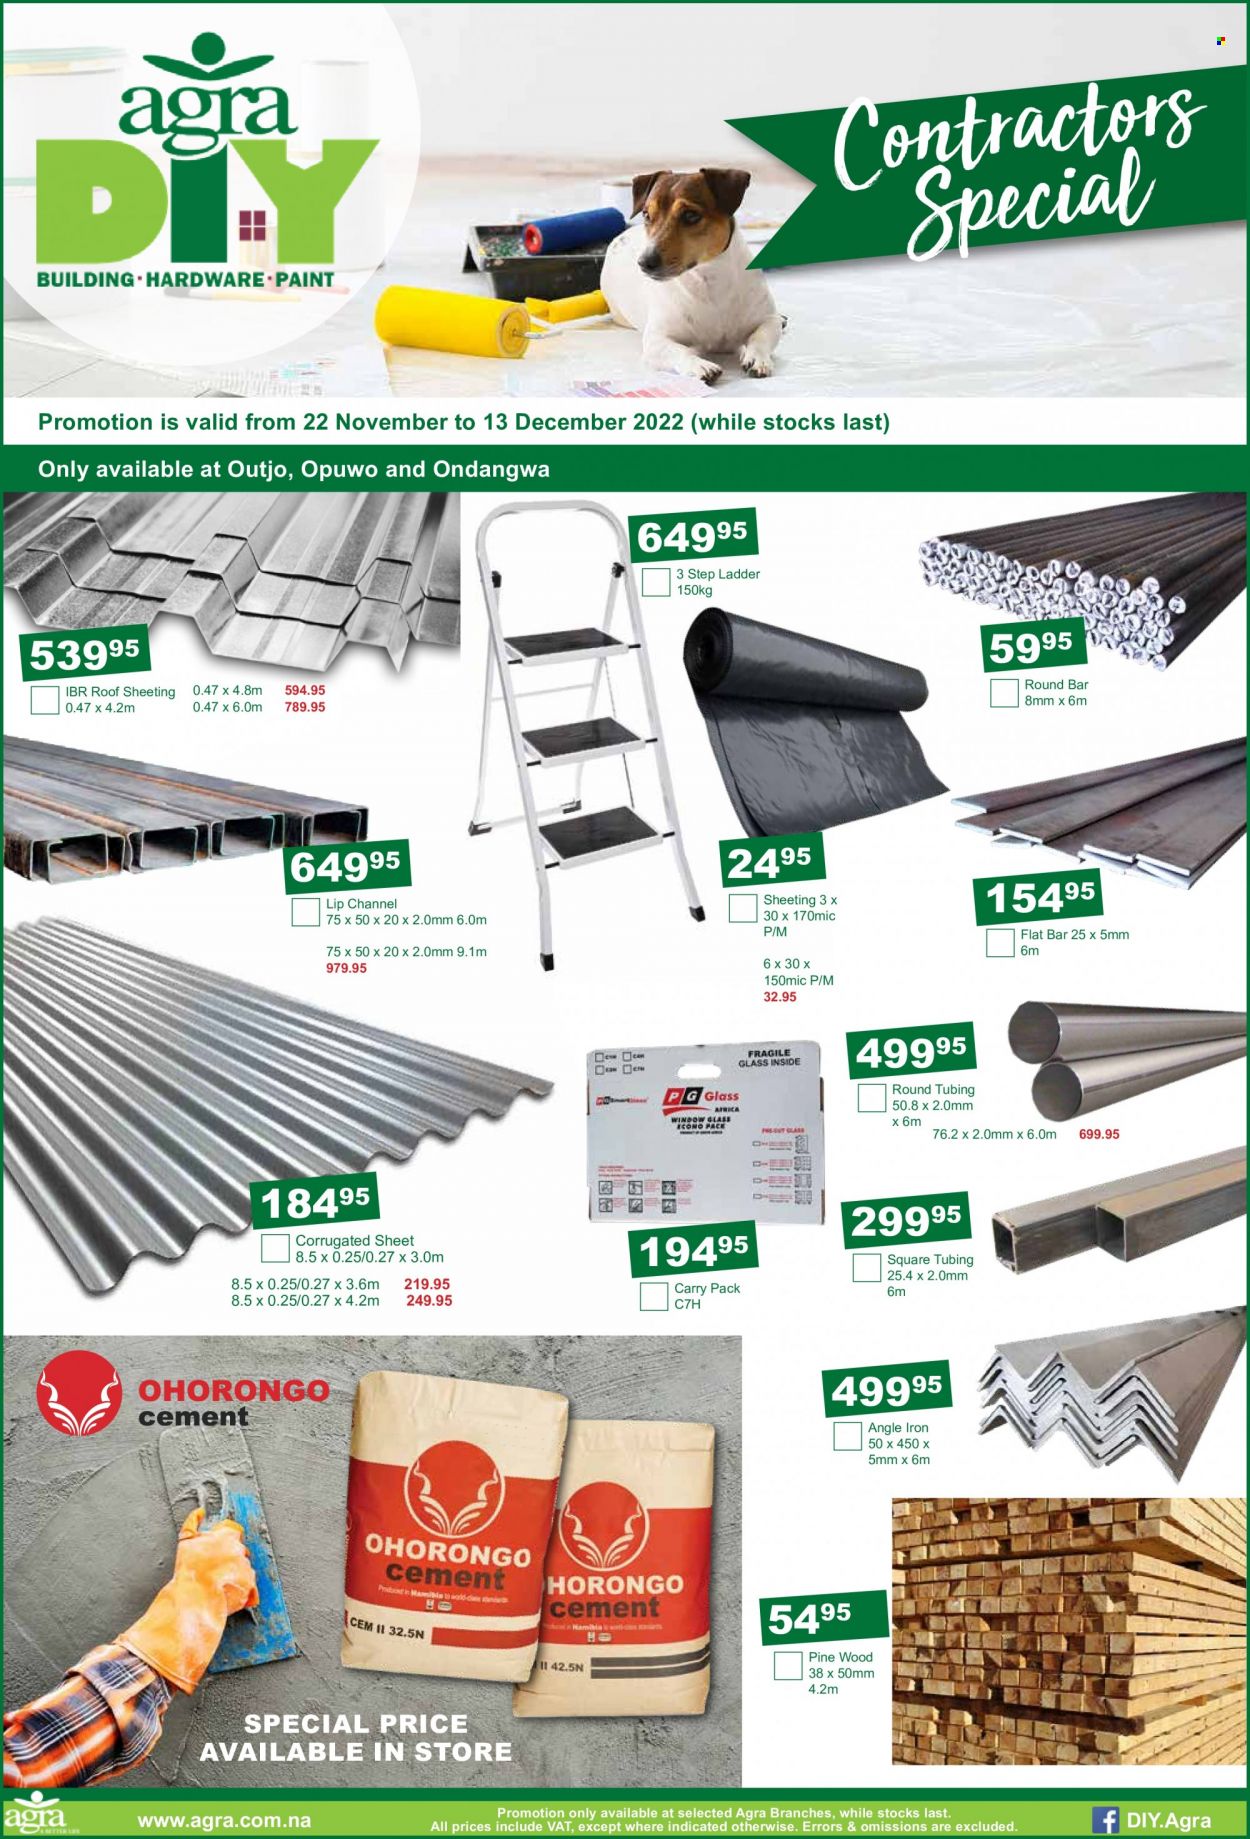 thumbnail - Agra catalogue  - 22/11/2022 - 13/12/2022 - Sales products - ladder, sheeting, paint. Page 10.